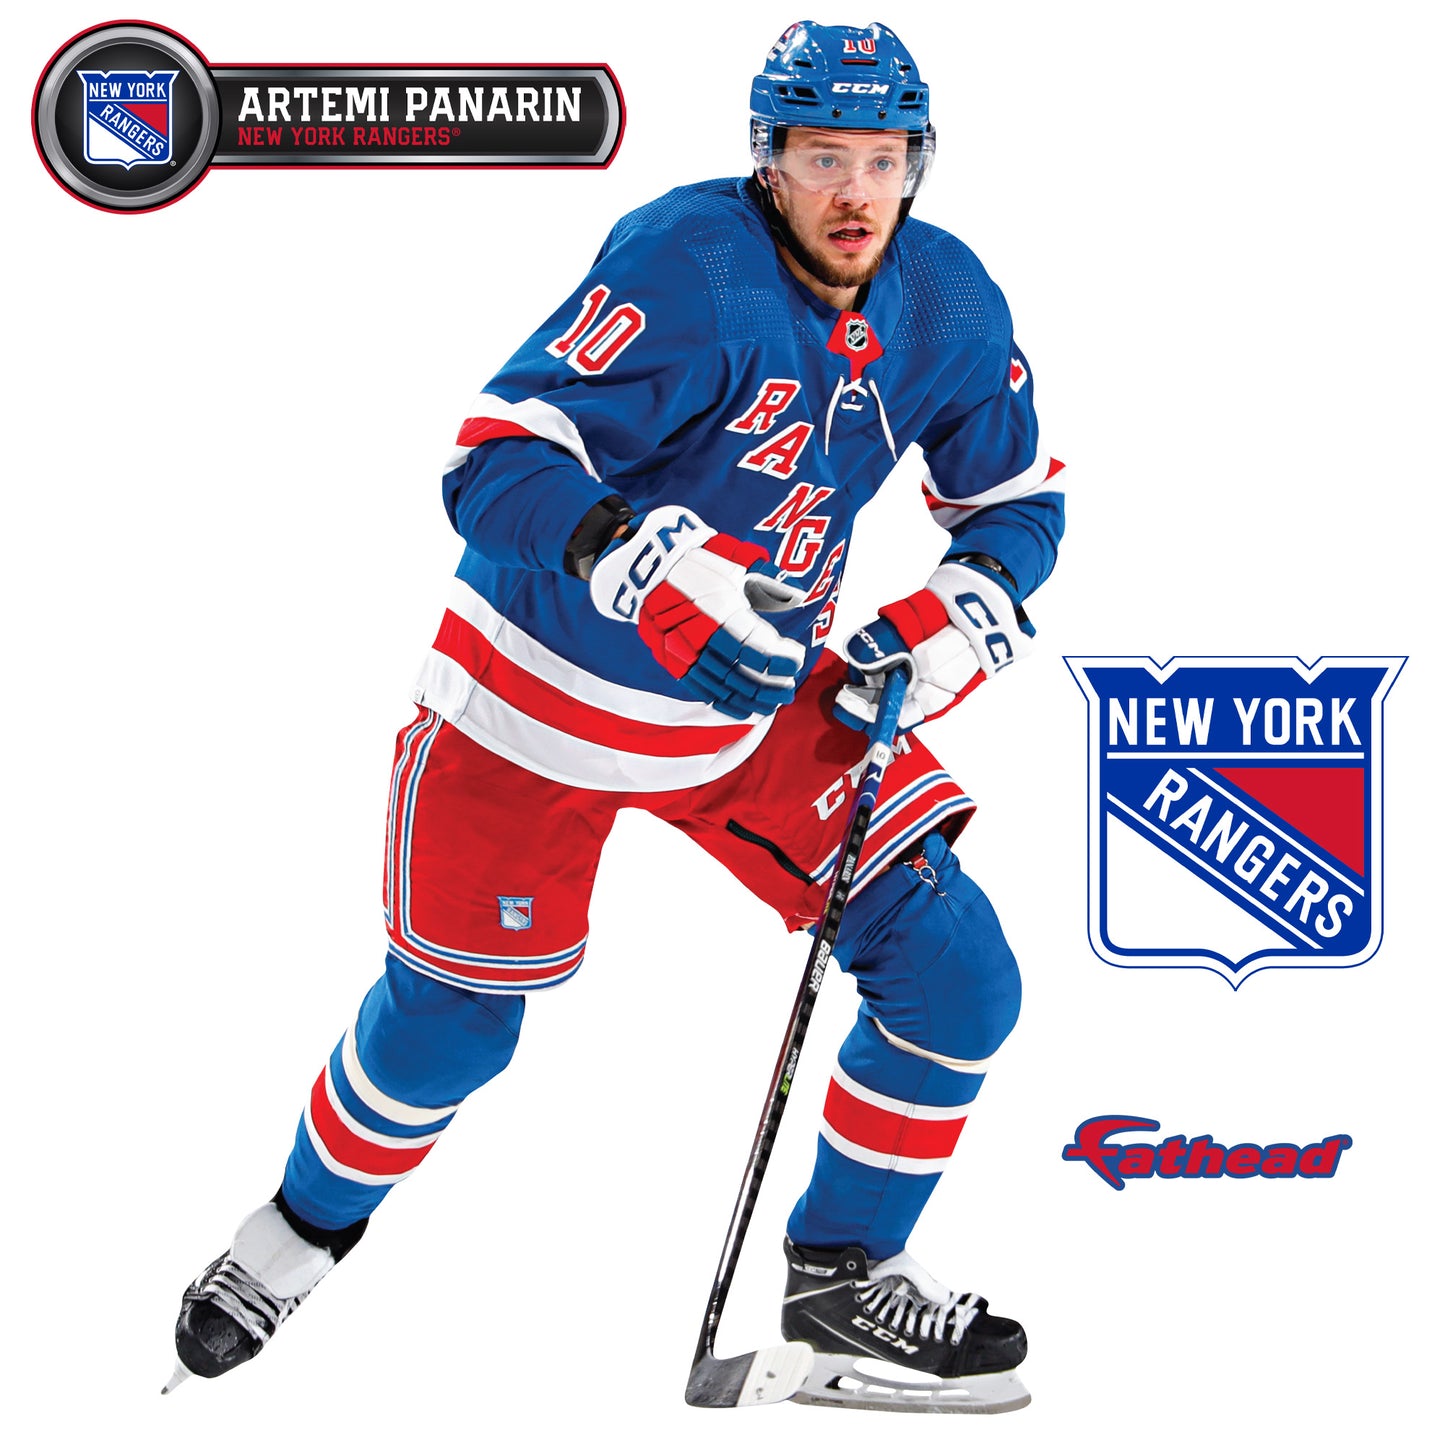 New York Rangers: Artemi Panarin         - Officially Licensed NHL Removable     Adhesive Decal